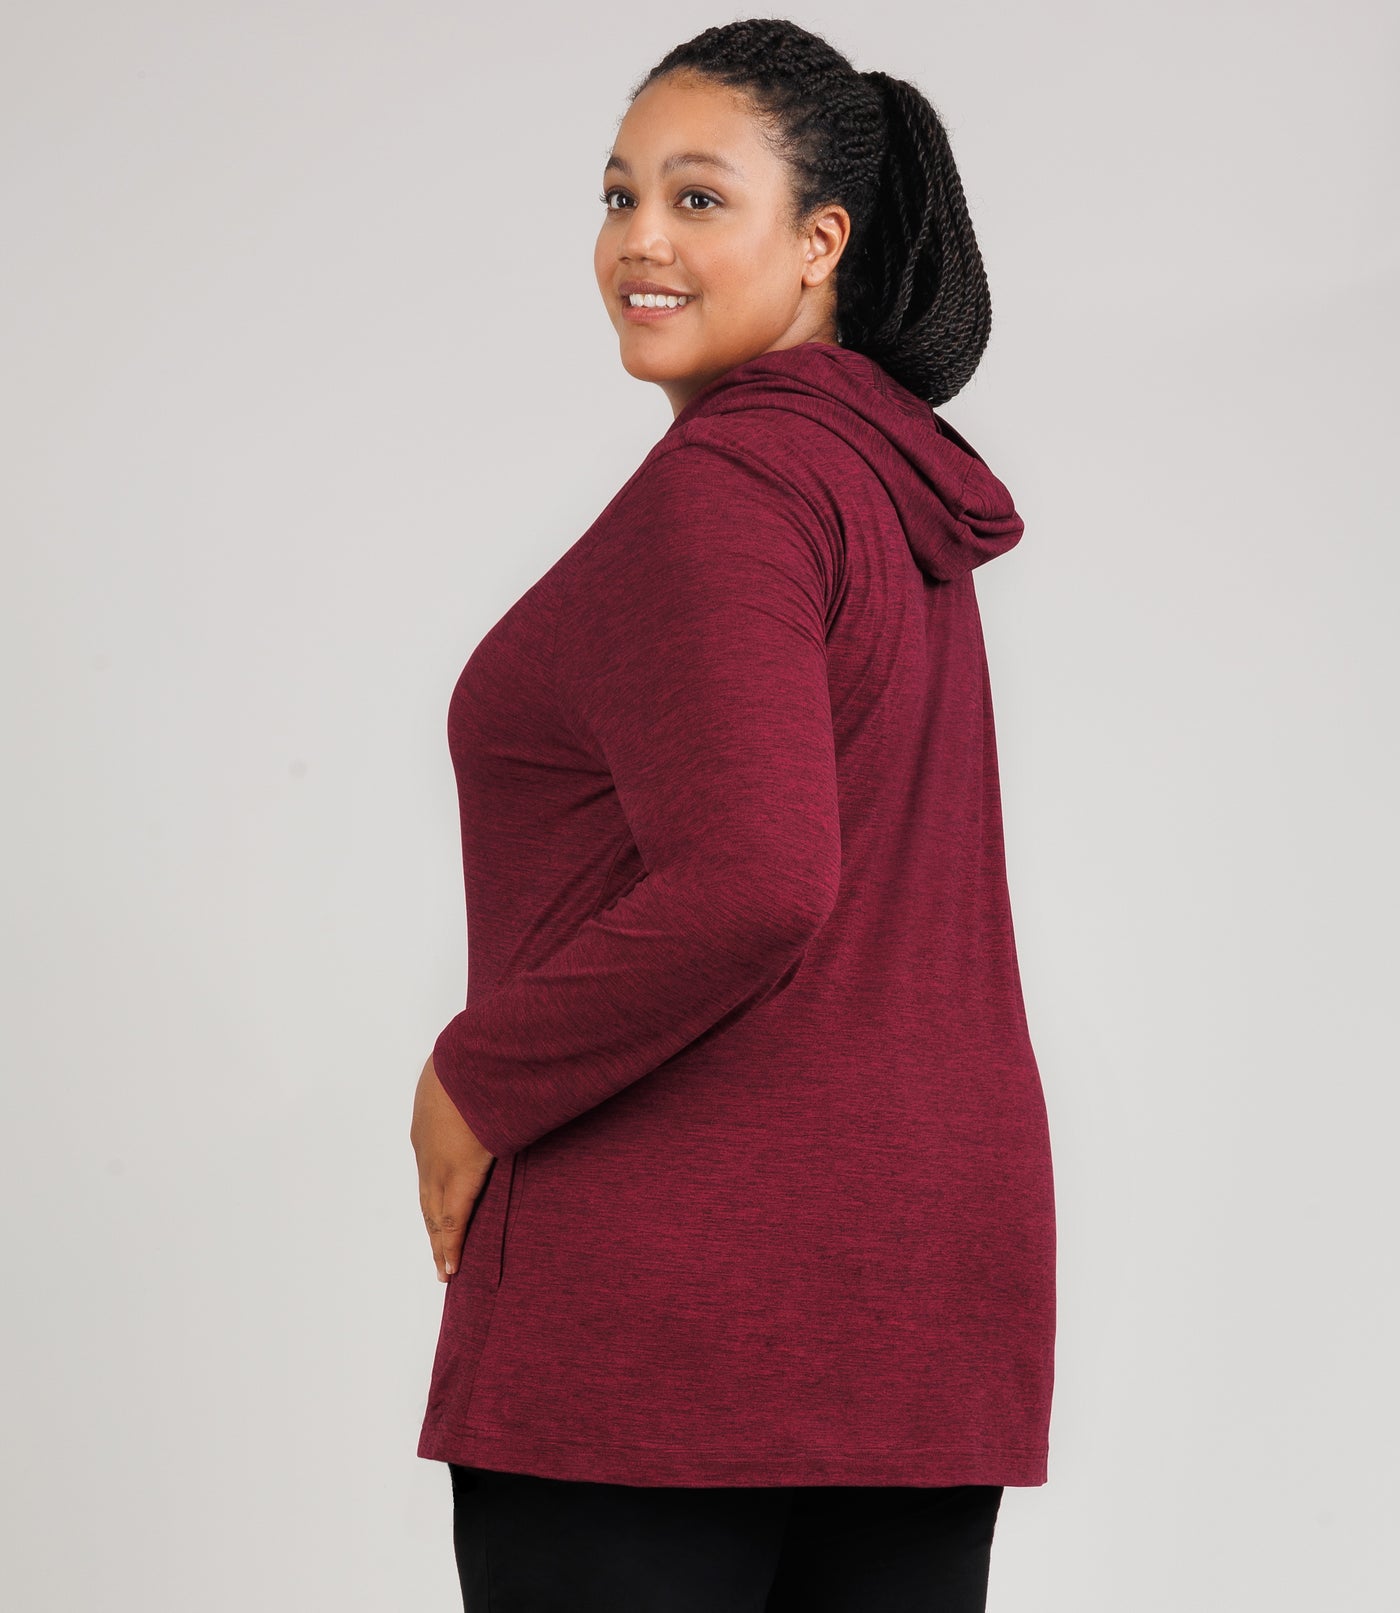 JunoActive model, facing side and back, wearing SoftSupreme Pocketed Hoodie in color Heather Cranberryl. Model's left hand is on left hip.